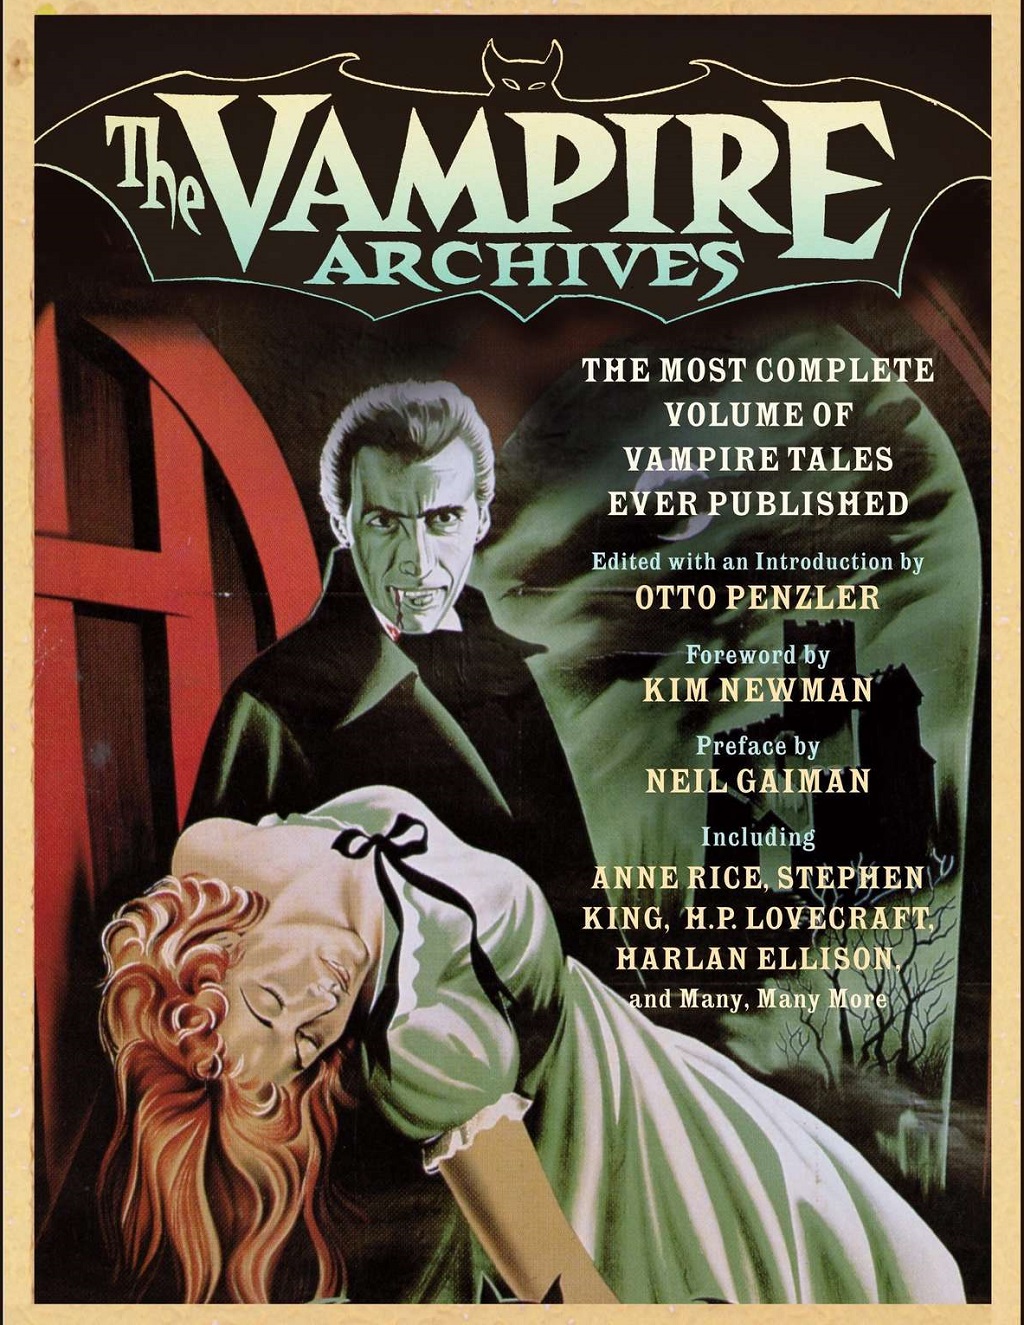 The Vampire Archives Audiobook Free Download and Listen